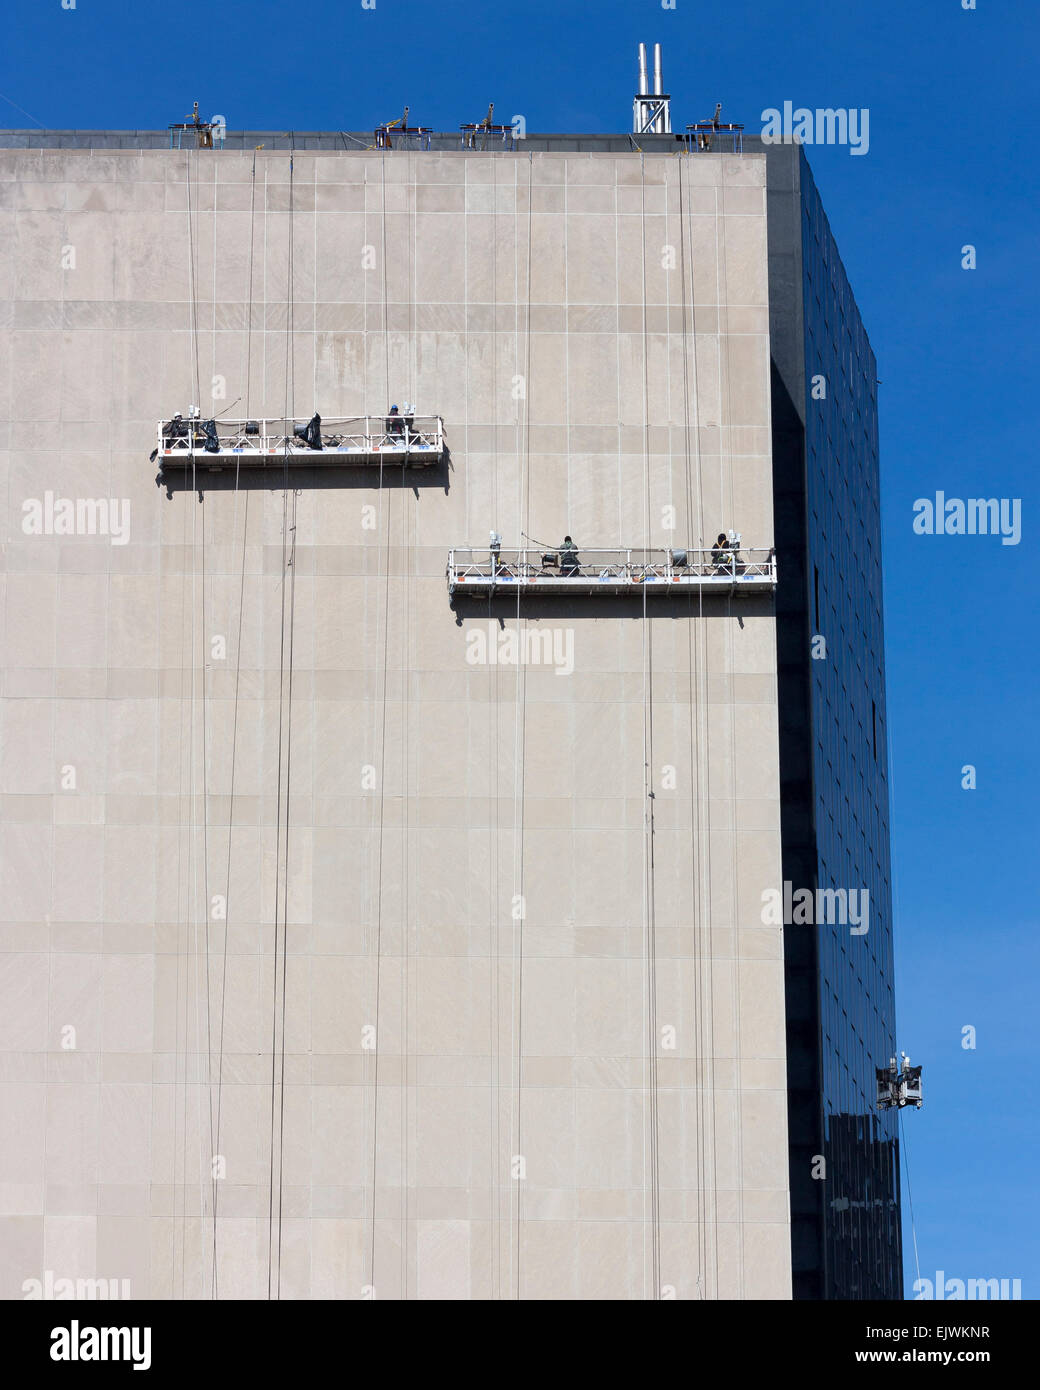 Workers in suspended platform working on the windowless side of a skyscraper in New York City. Stock Photo